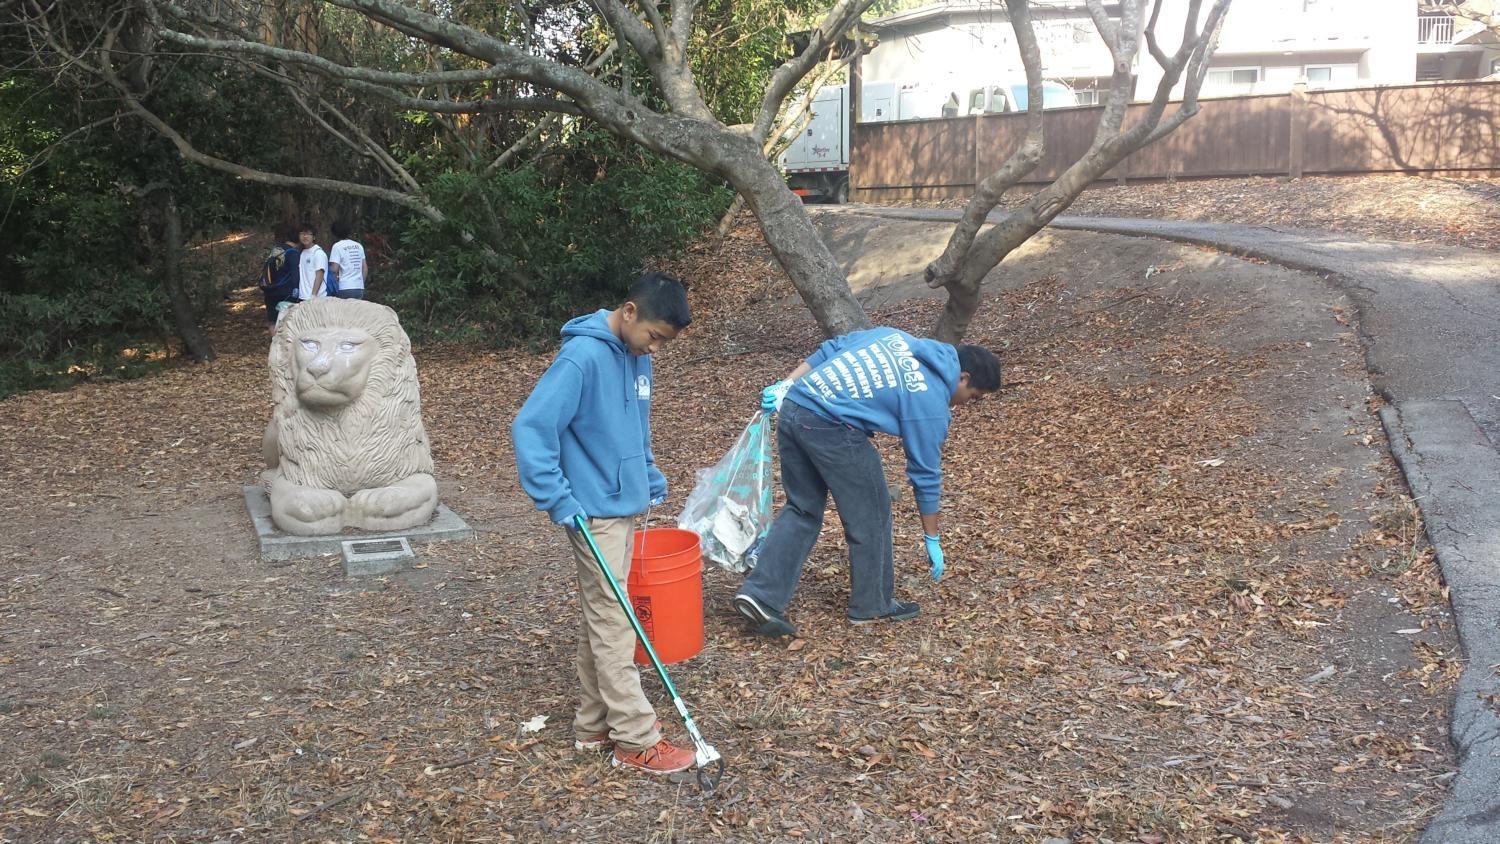 Alex Chen, a freshman, and Christian Licudine, a senior, collected discarded cigarette butts and wrappers in the Twin Pines Park section of the Coastal Cleanup.